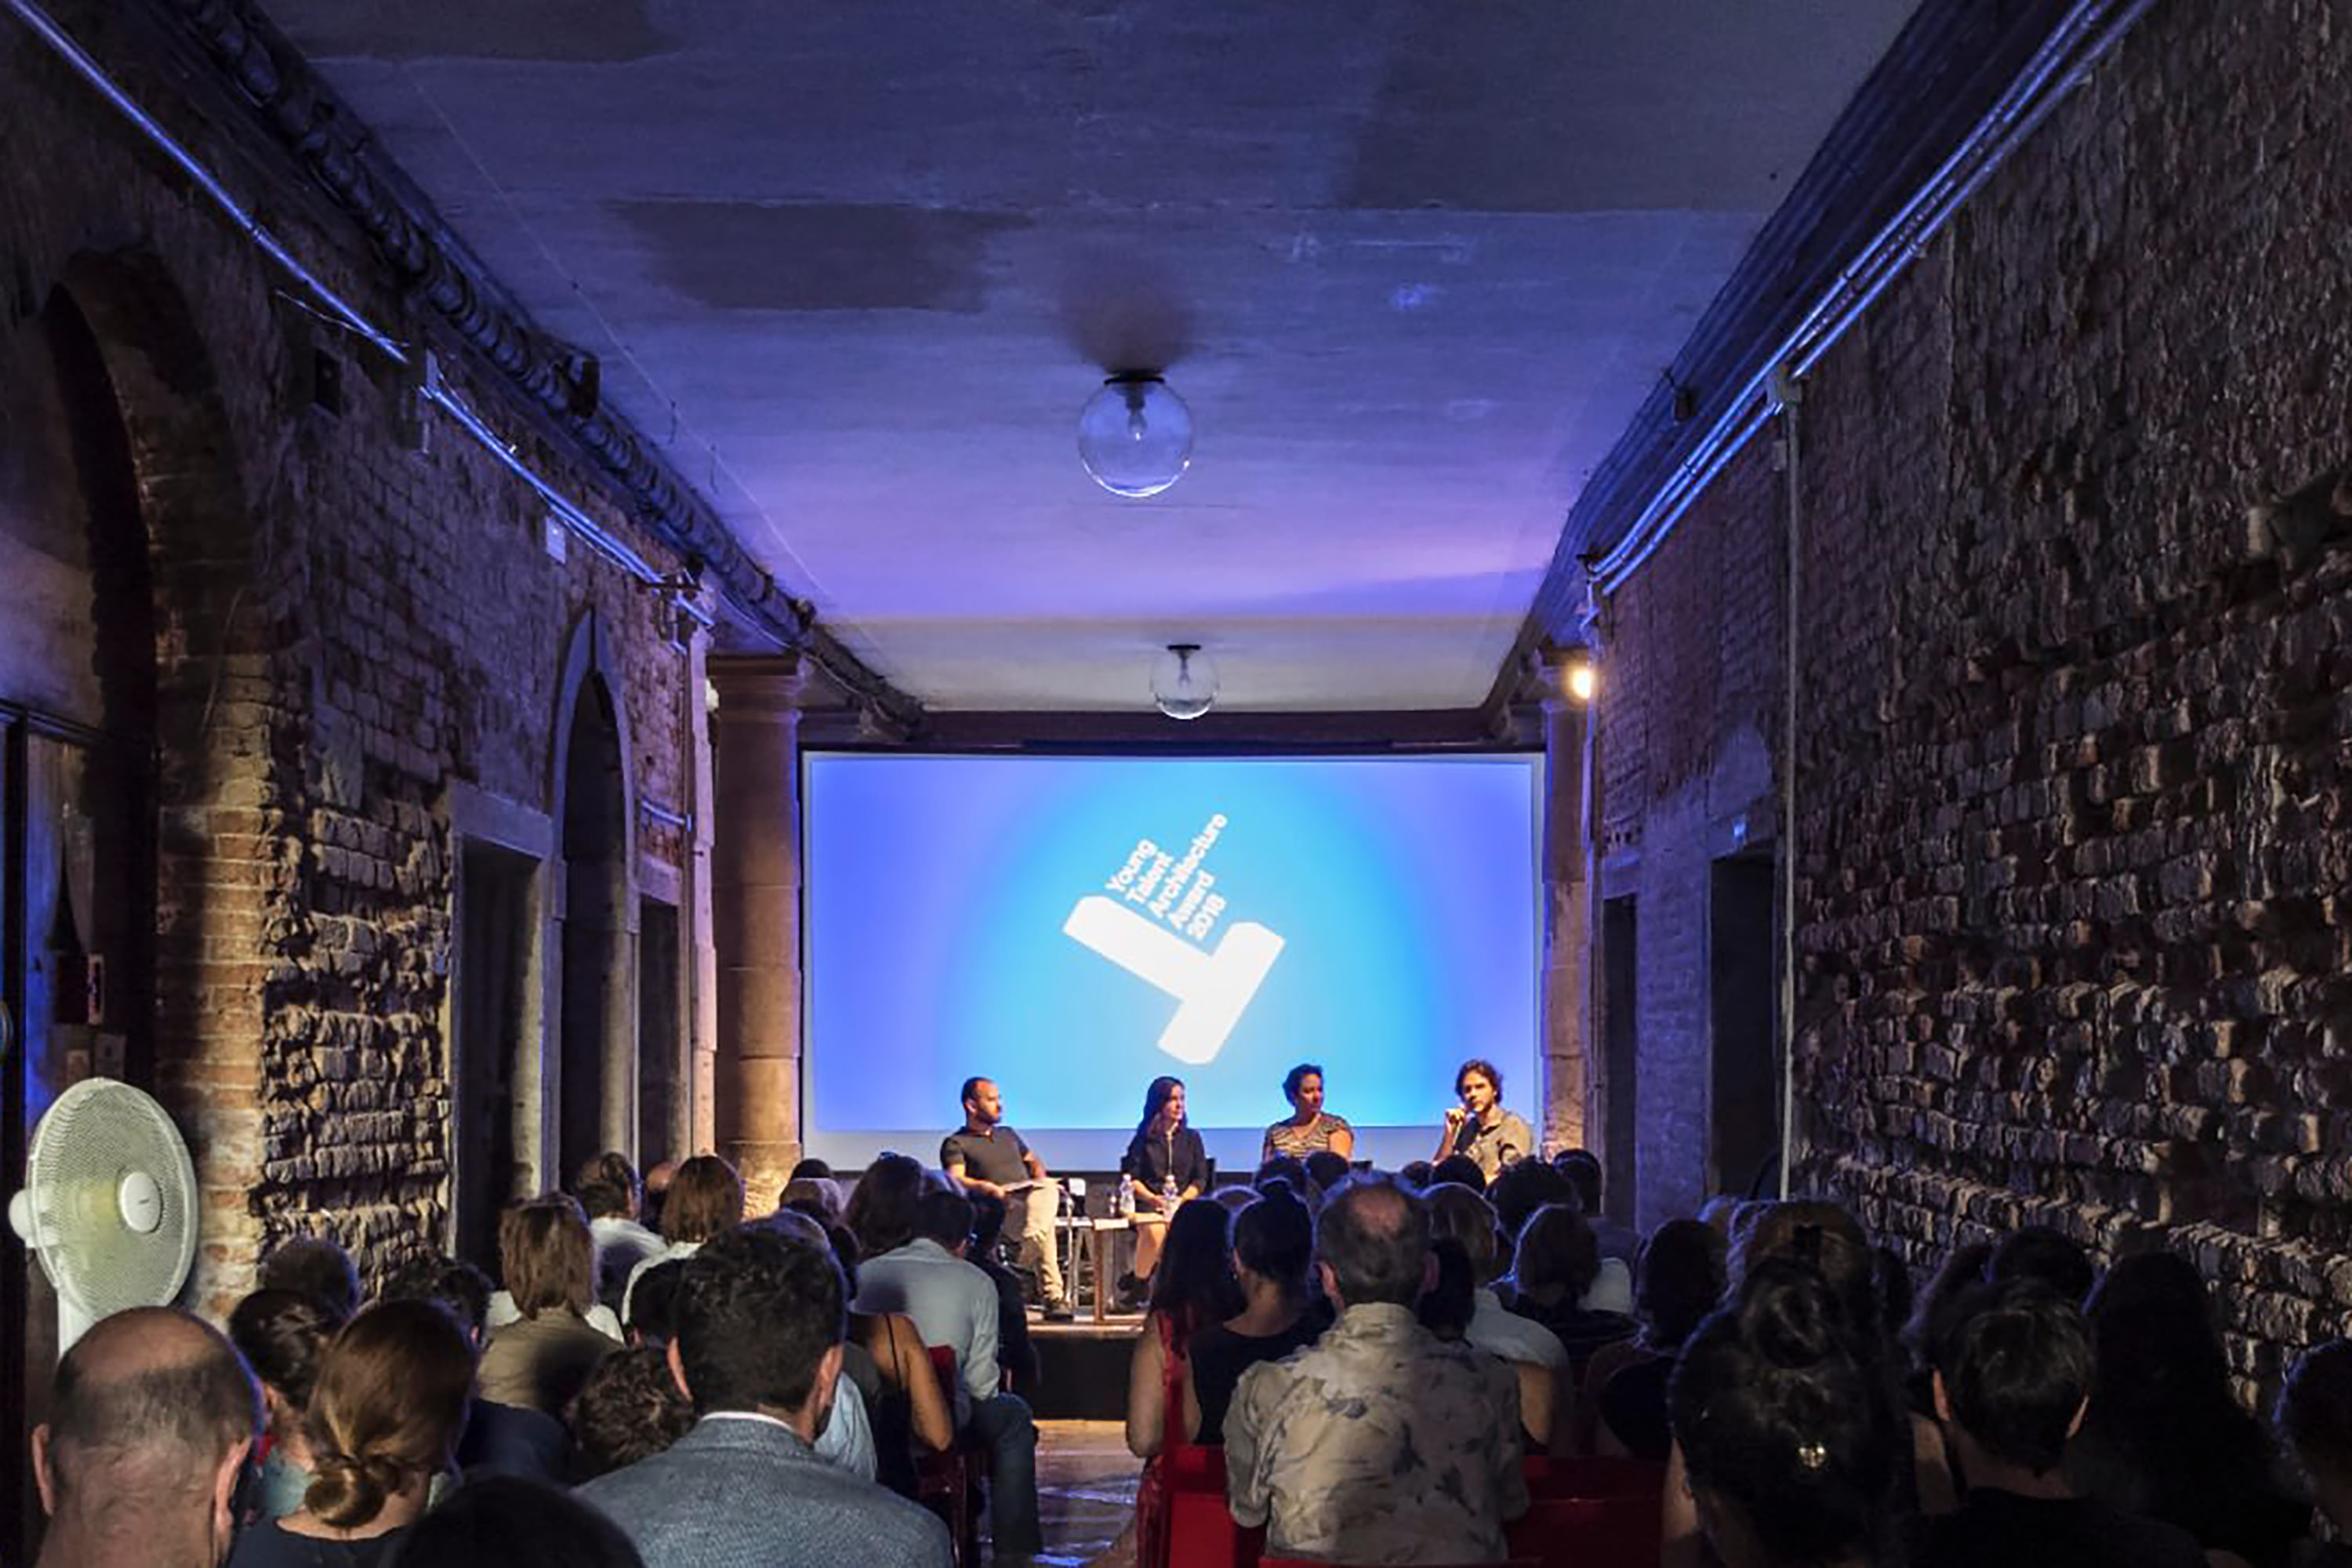 Young Talent Architect Award ceremony at the Architecture Biennale 2018 in Venice